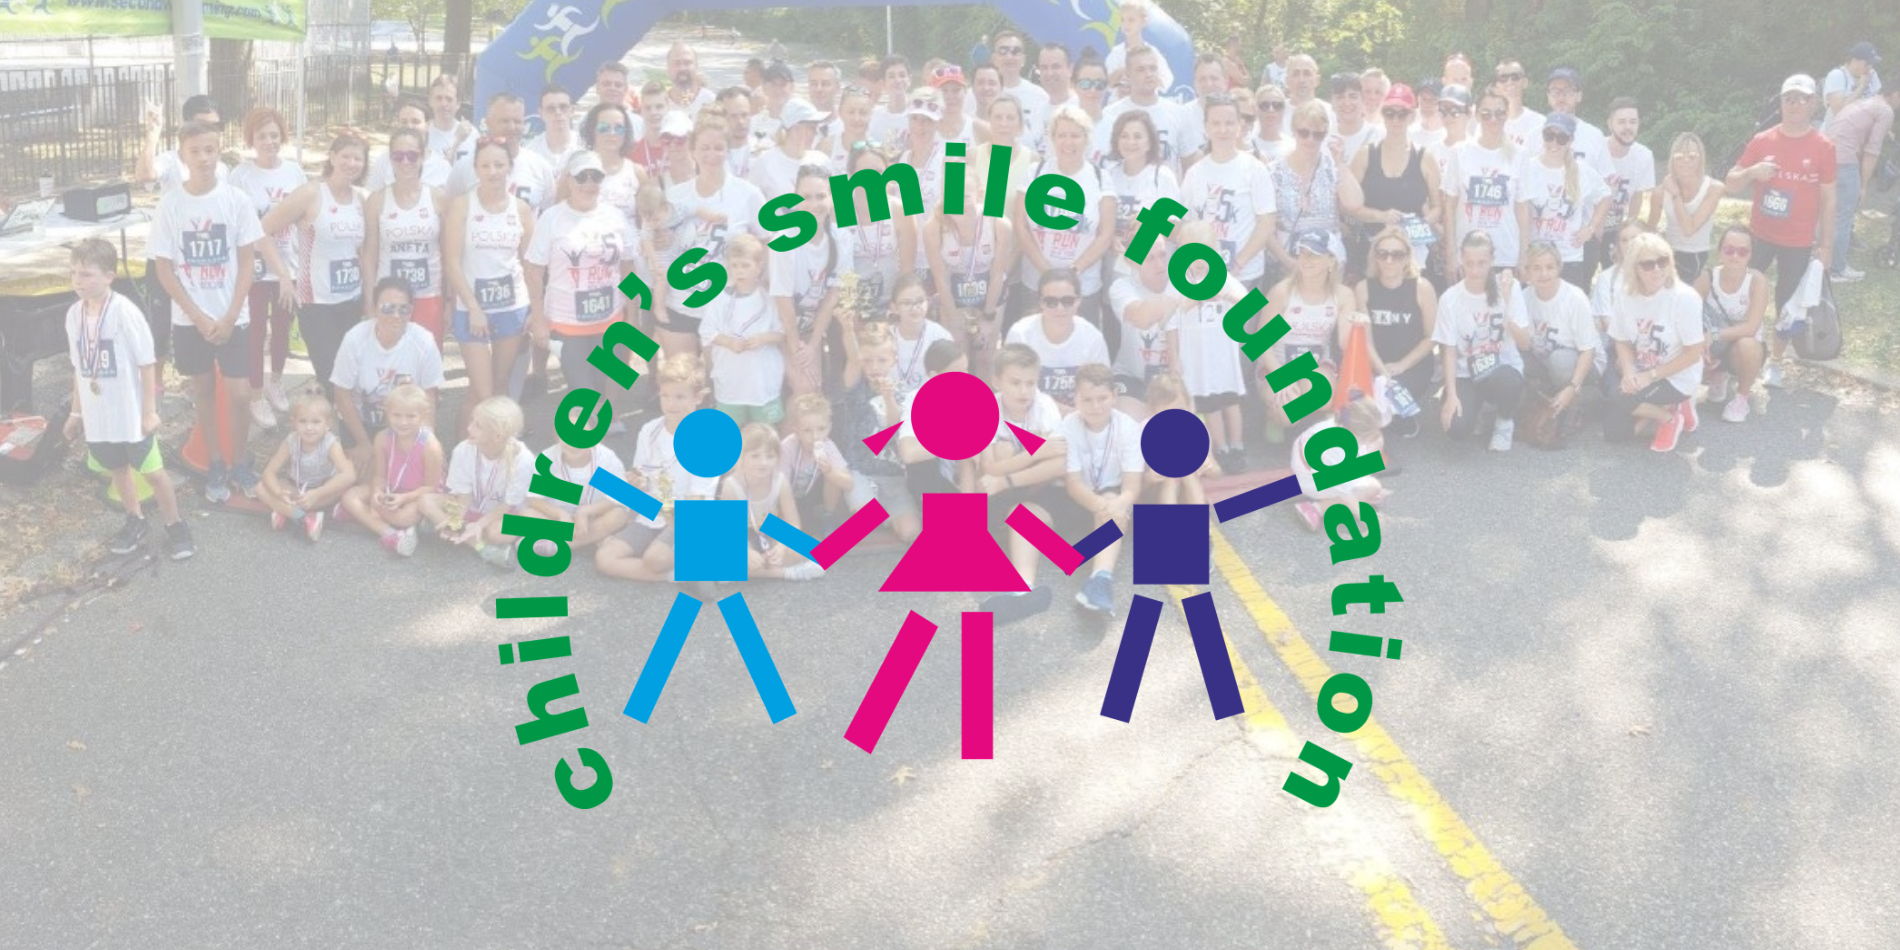 Run For Children's Smile 5K Run/Walk and Free 1K Kids Run For Ages 5-12 promotional image